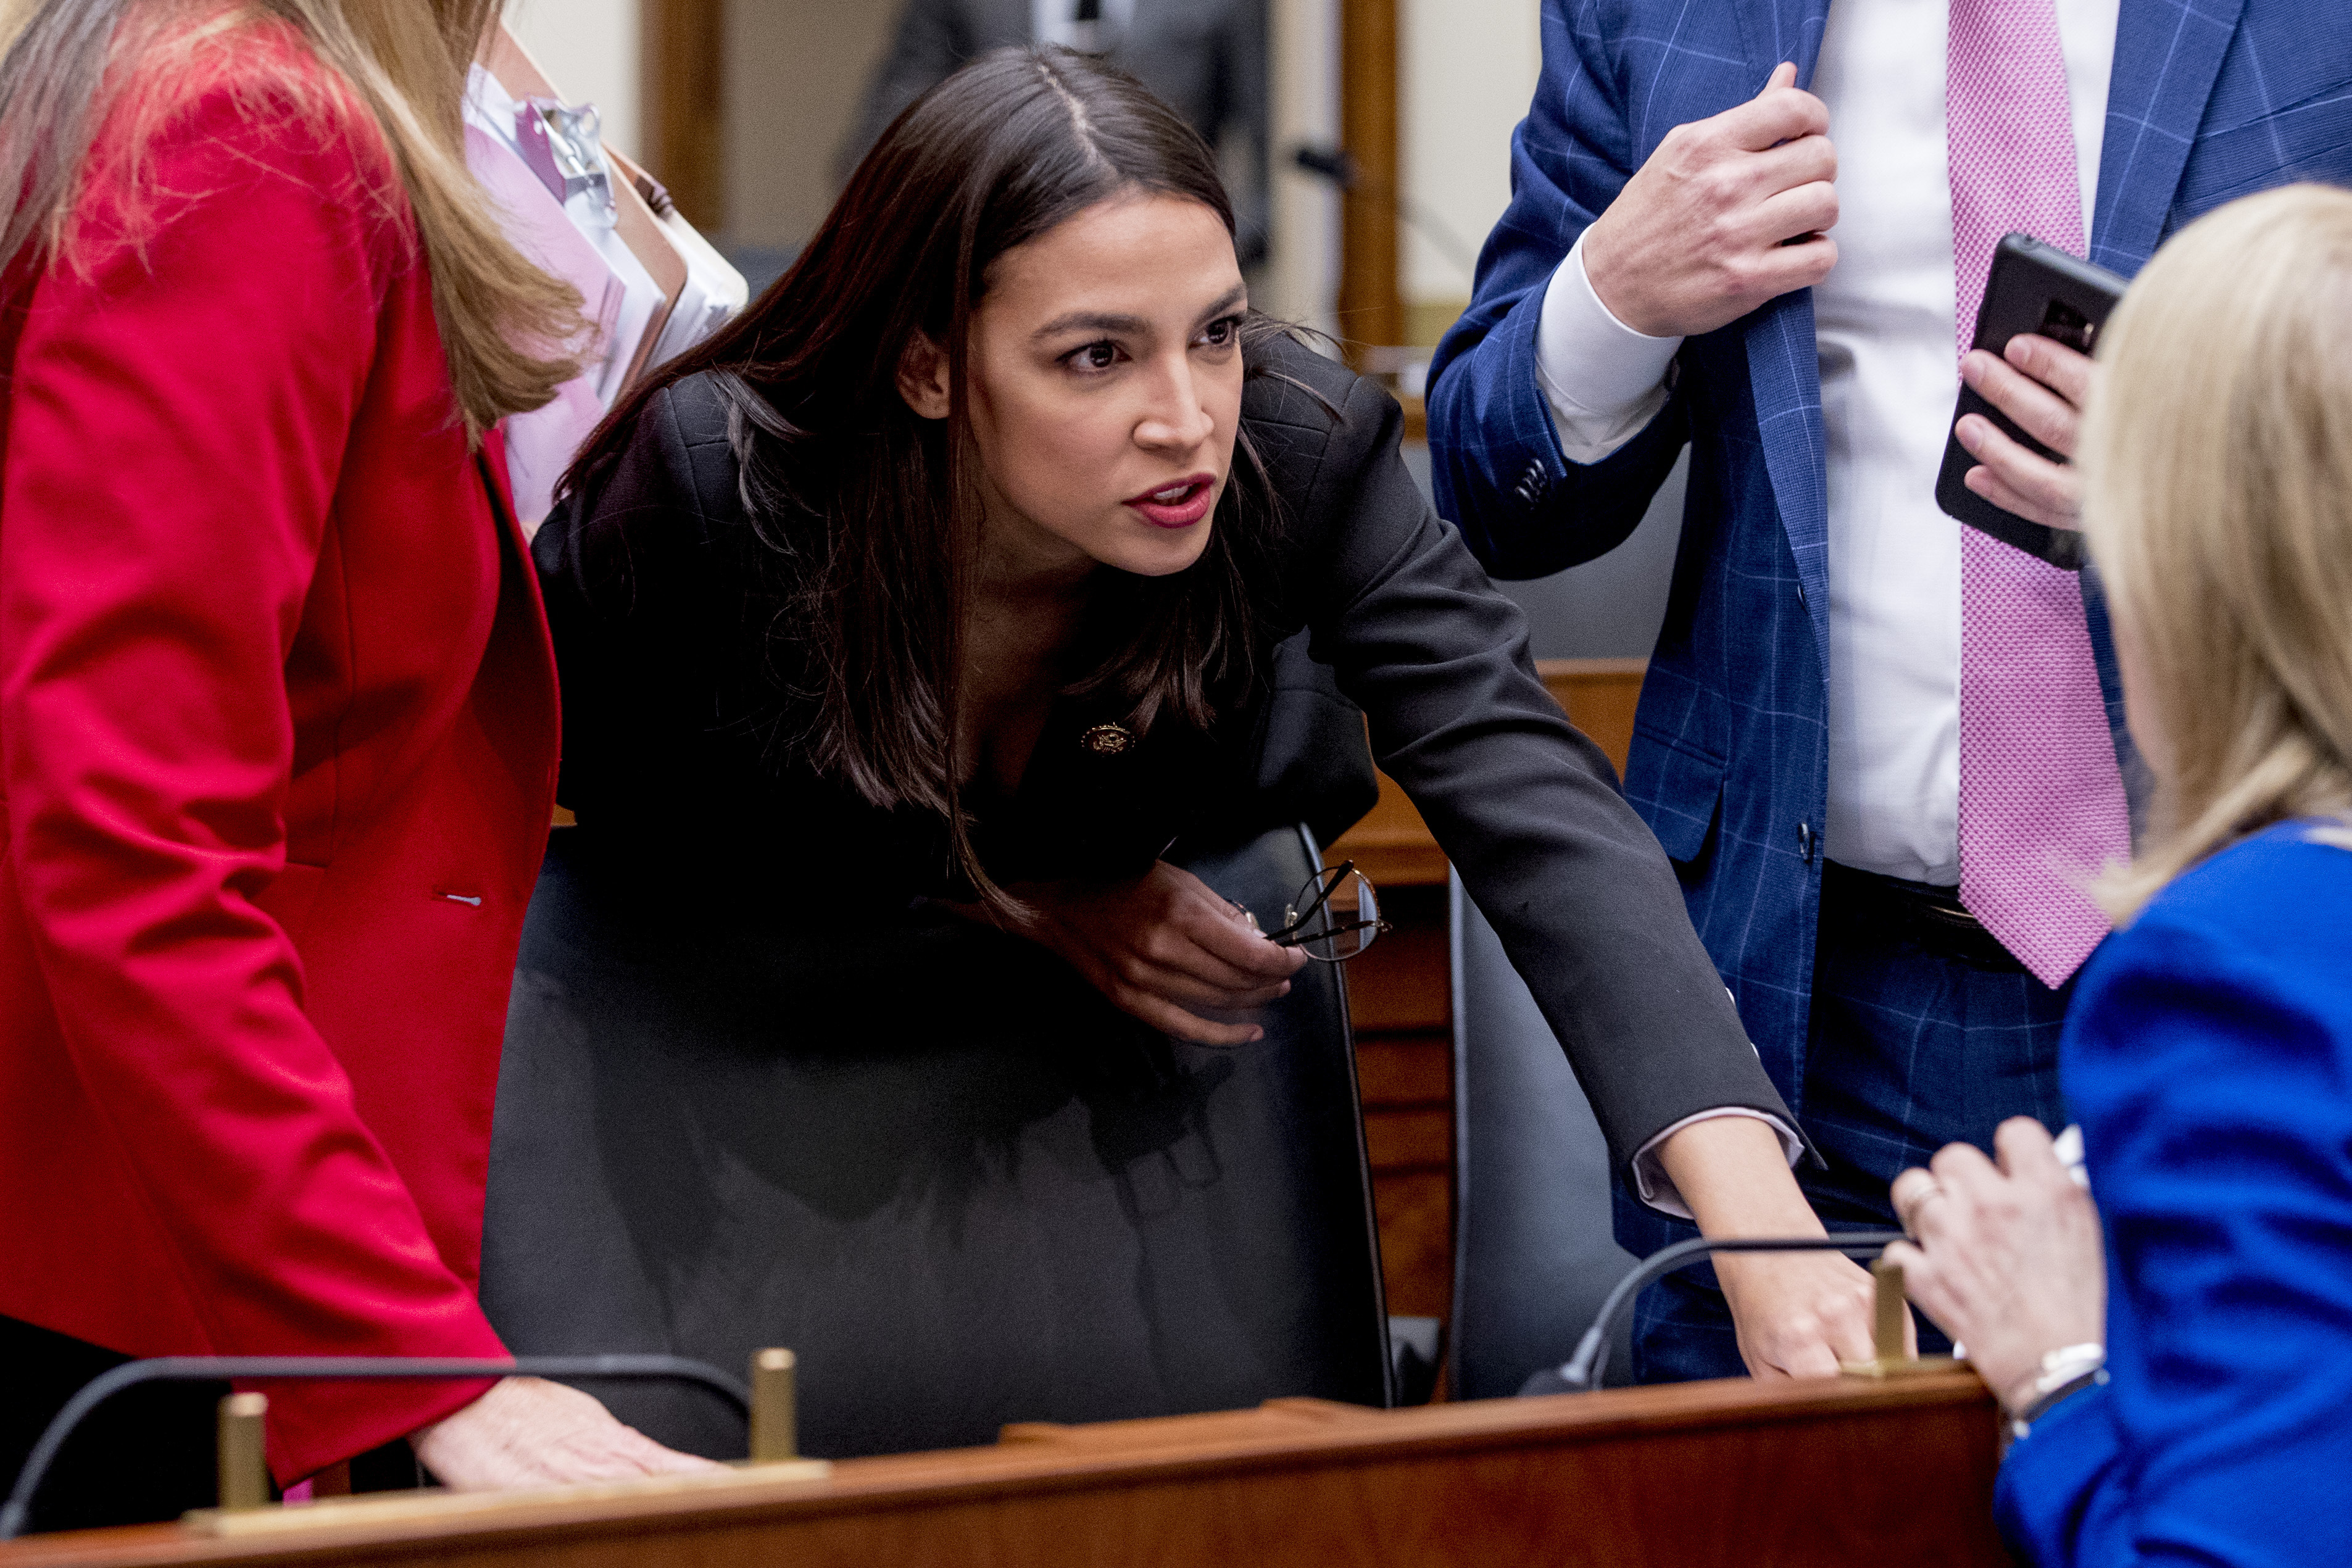 Alexandria Ocasio-Cortez speaks with other lawmakers during a break from testimony from Mark Zuckerberg before a House Financial Services Committee hearing on Capitol Hill in Washington, on Wednesday.